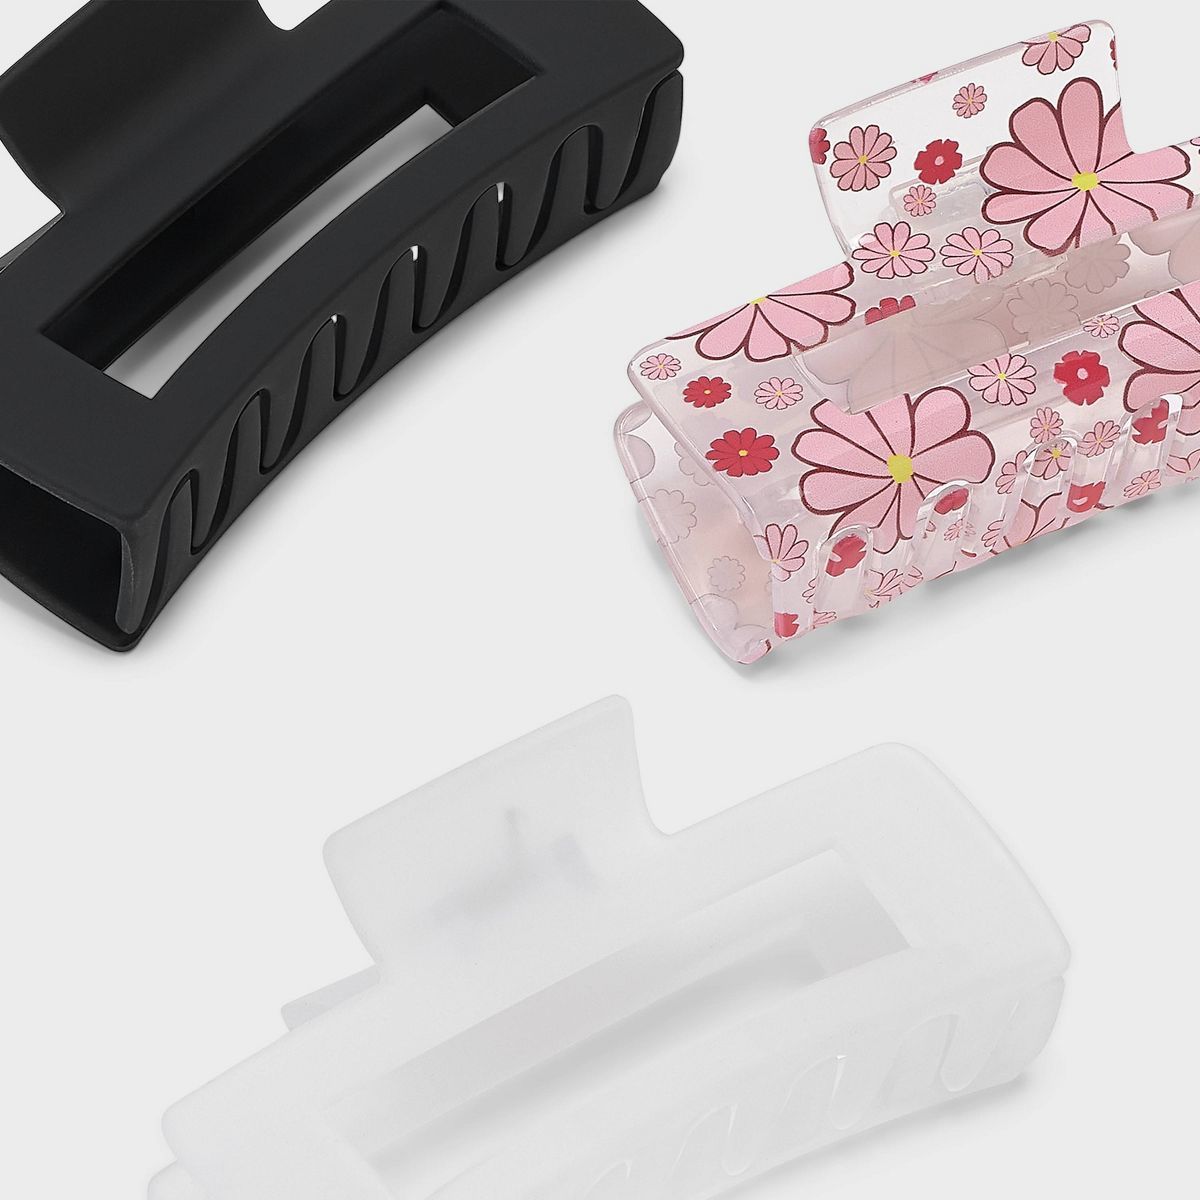 Flower and Solid Rectangle Claw Hair Clip Set 3pc - Wild Fable™ Pink/Black/White | Target